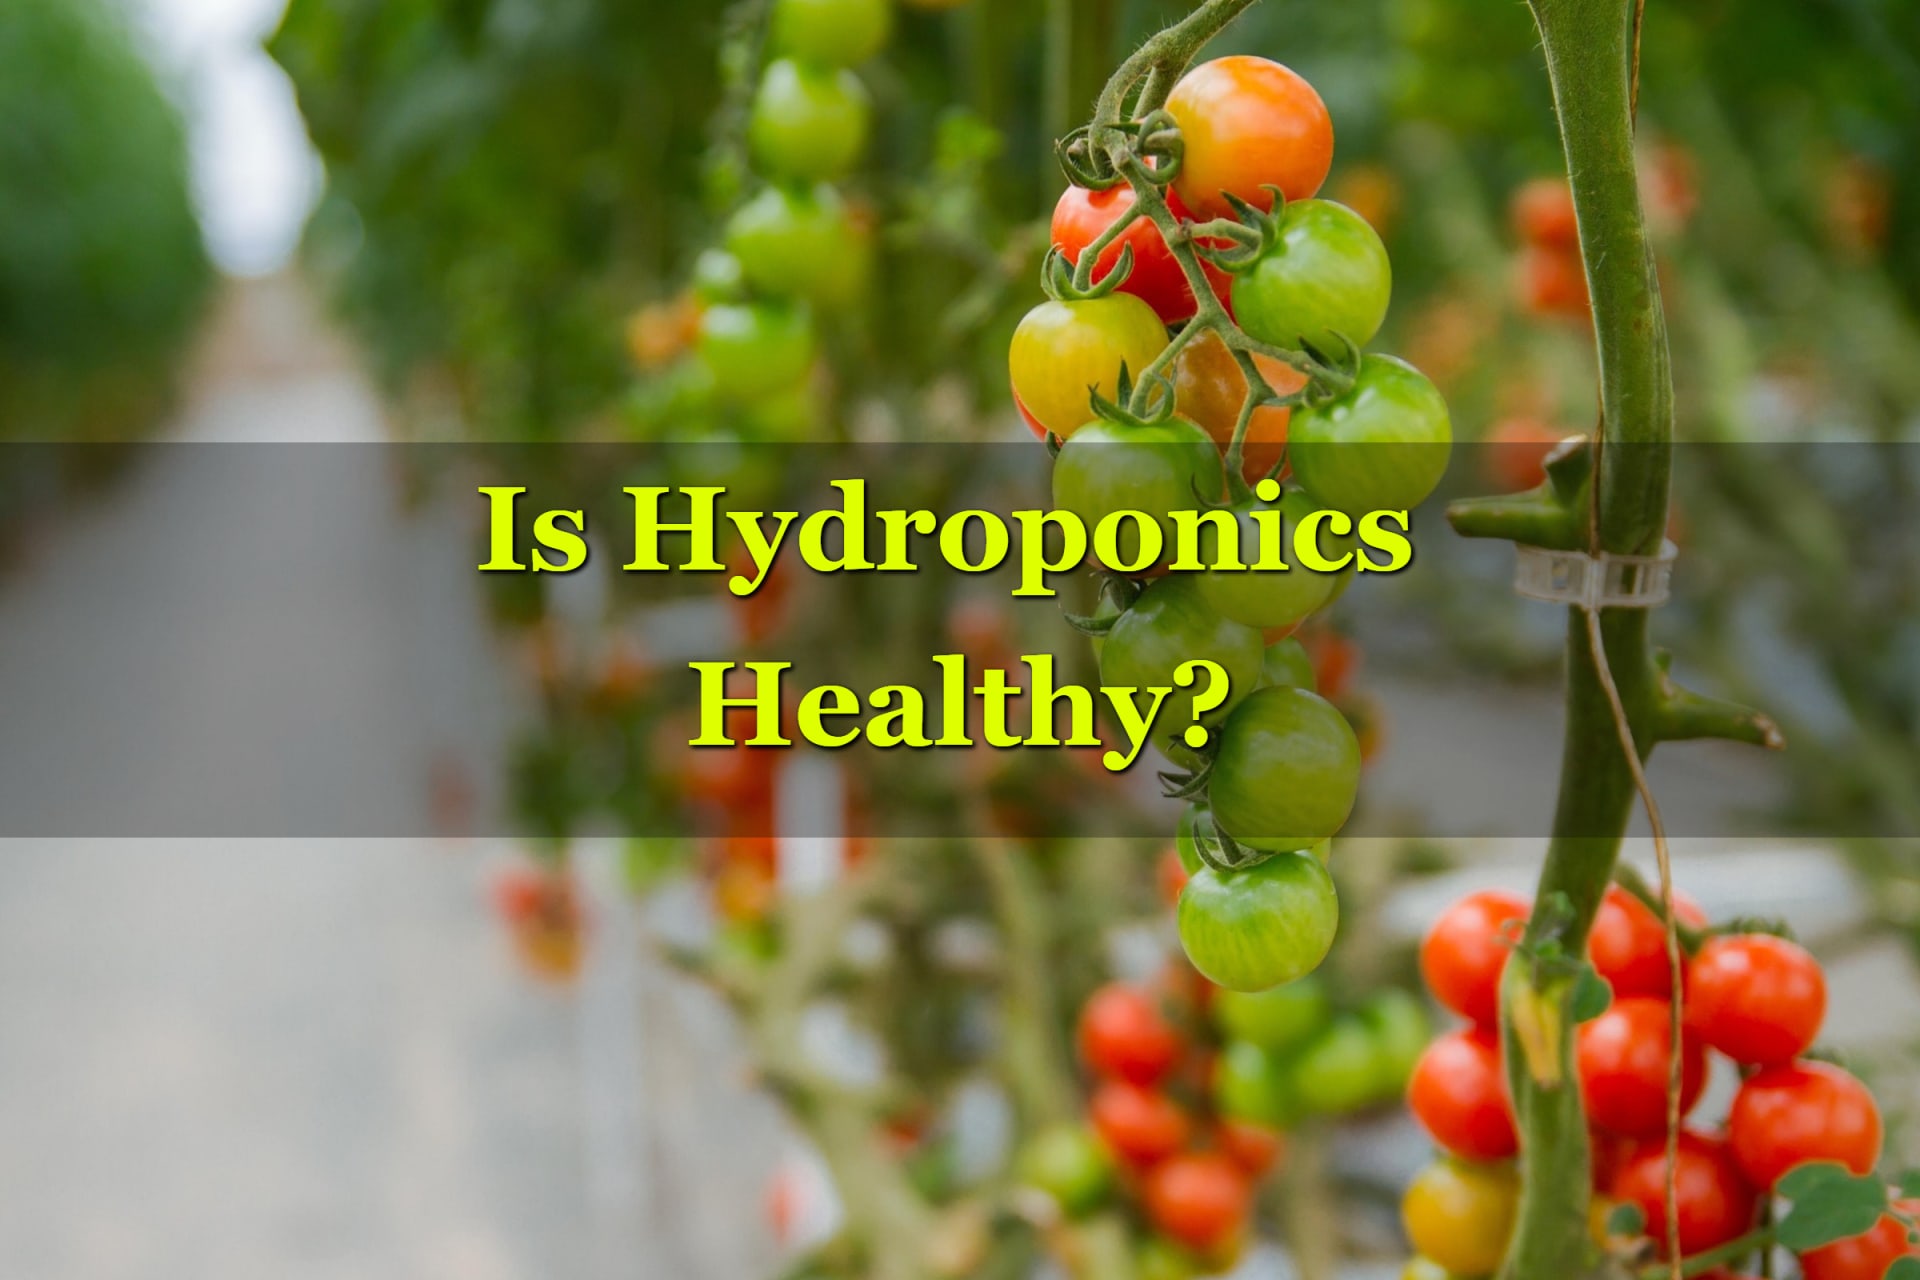 A hydroponics farm showing healthy tomatoes